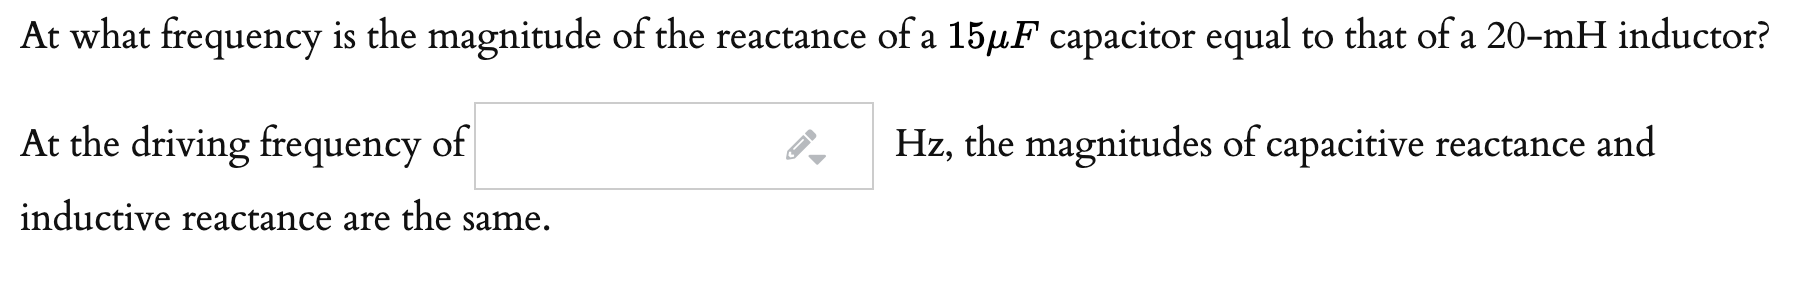 At what frequency is the magnitude of the reactance of a 15µF capacitor equal to that of a 20-mH inductor?
At the driving frequency of
Hz, the magnitudes of capacitive reactance and
inductive reactance are the same.
